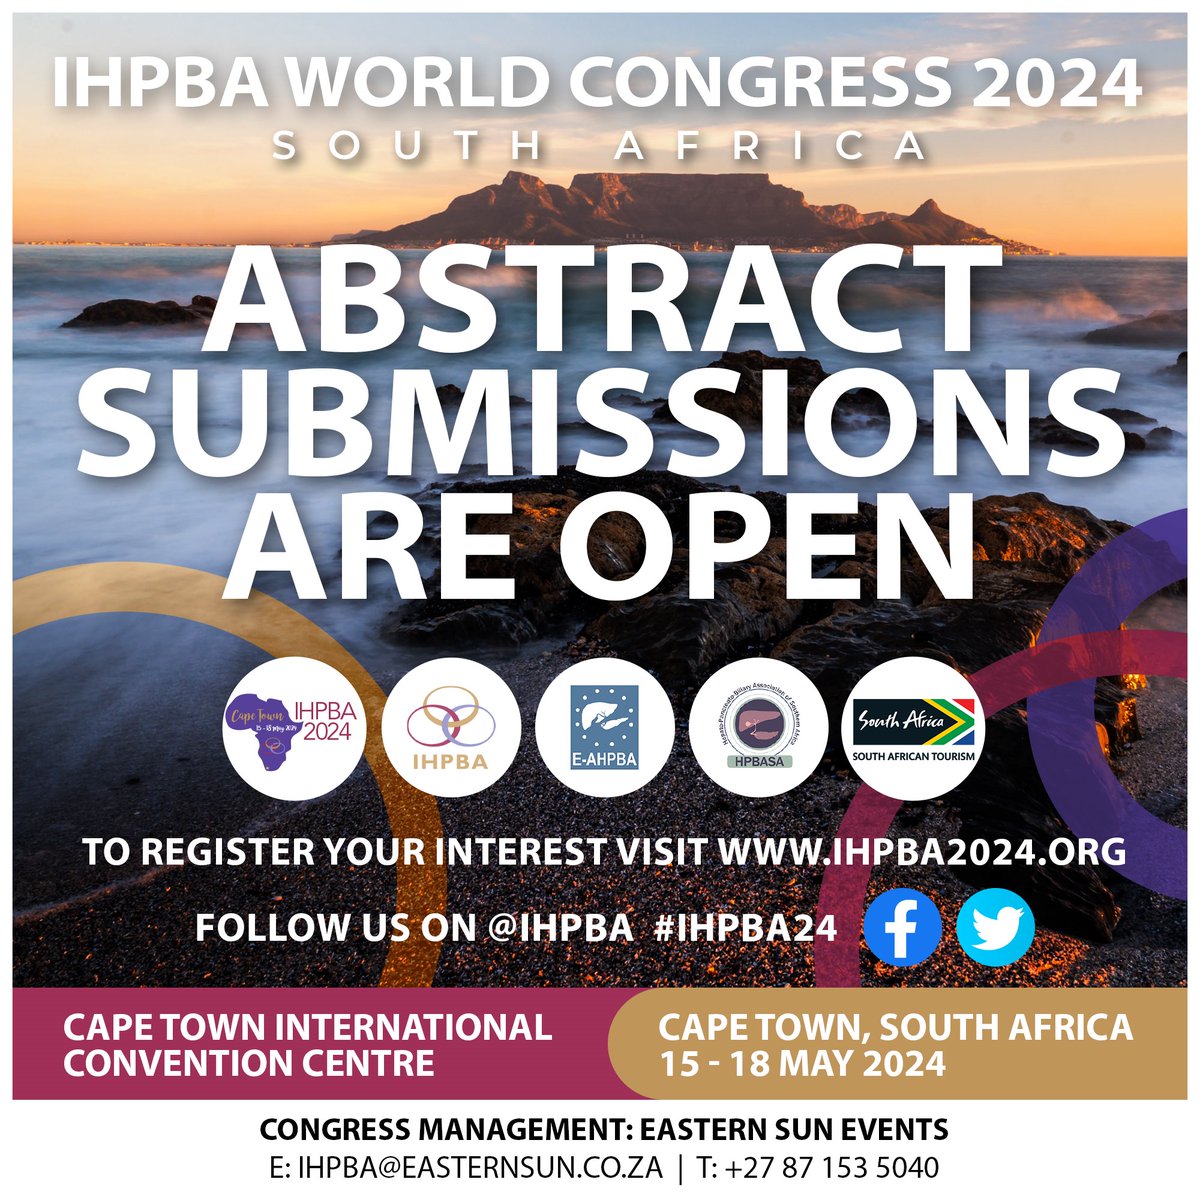 Abstract submissions are now open for #ihpba2024! Don't miss your chance to share your research with the world's leading experts in Hepato-Pancreato-Biliary surgery. Submit your abstract at ihpba2024.org and join us in Cape Town, 15-18 May 2024